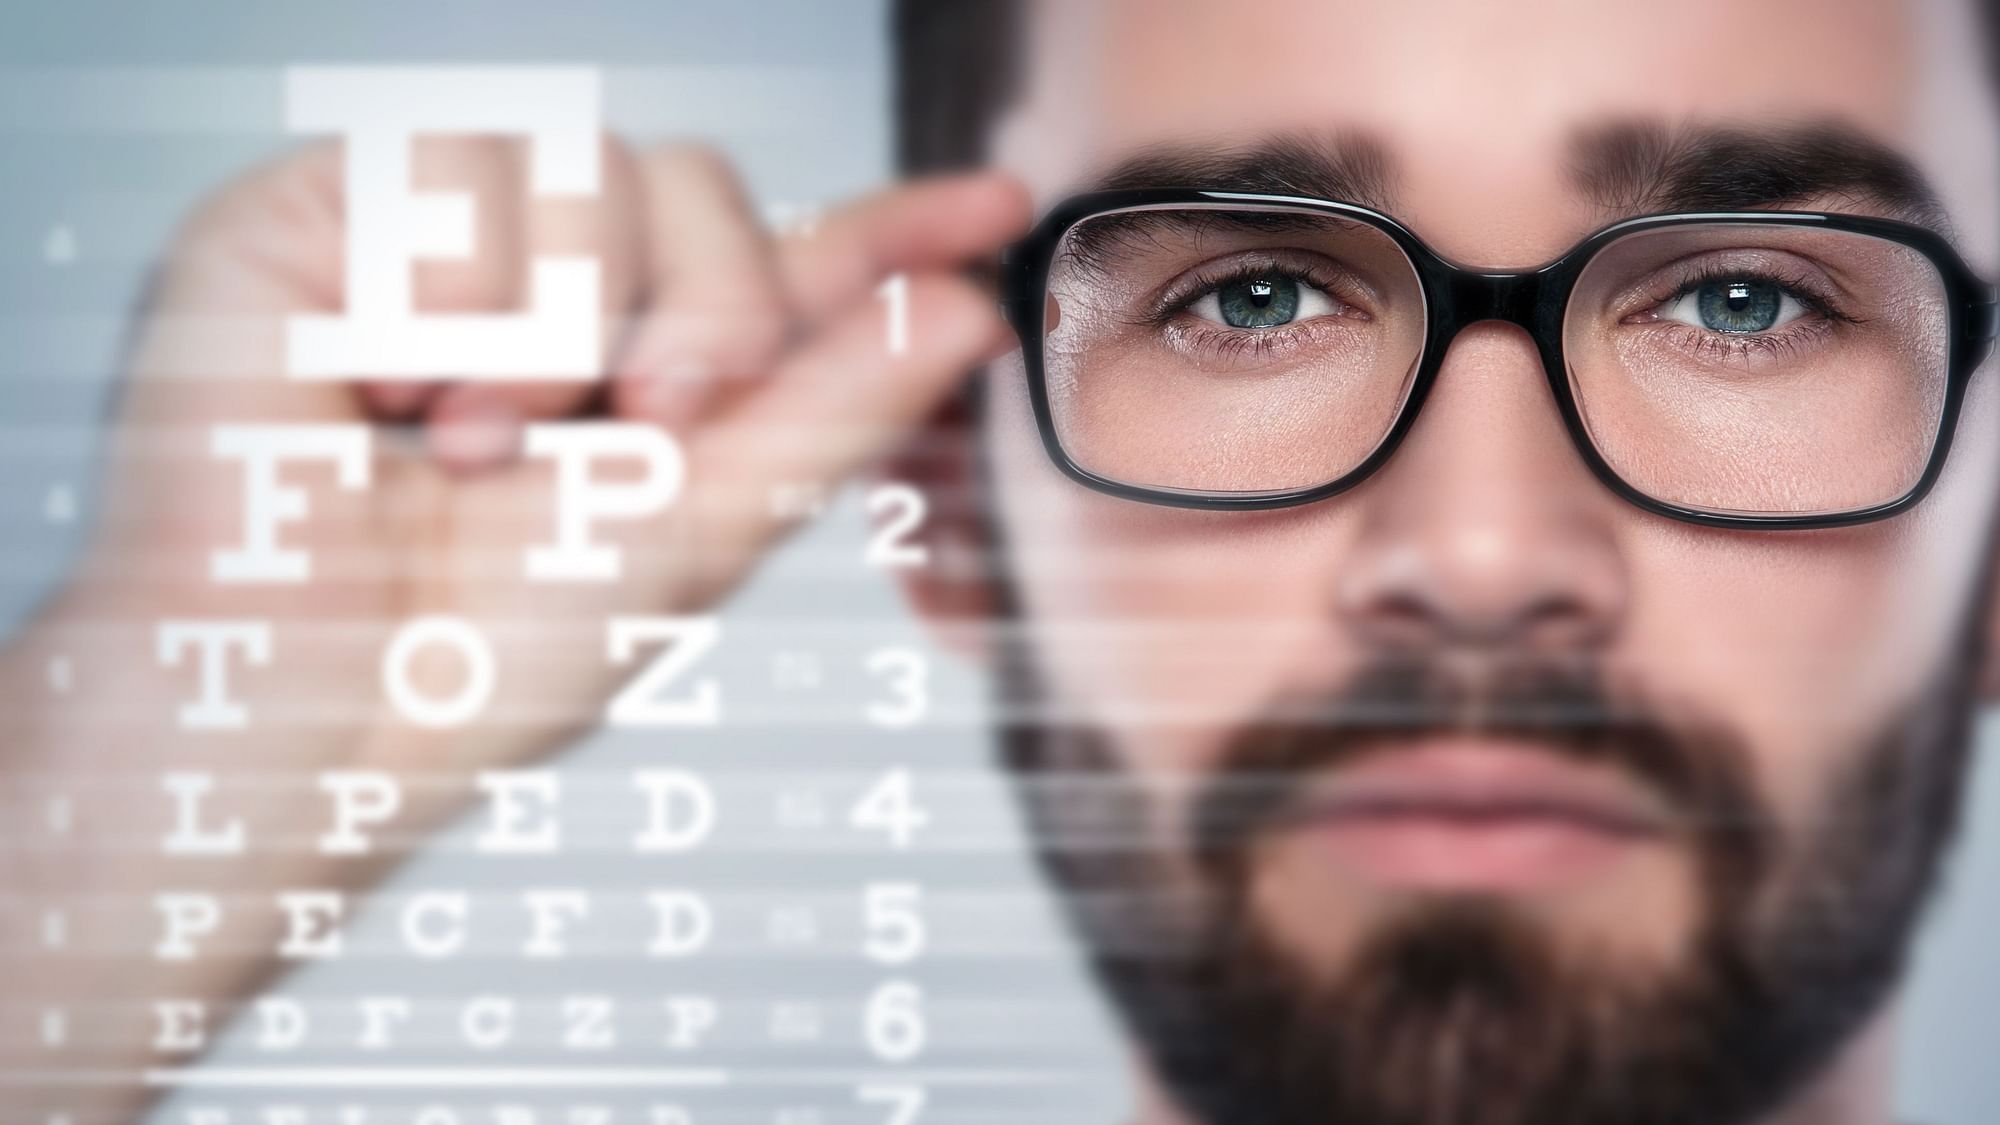 Even with a rise in poor eyesight, only one in five adults get regular eye checkups